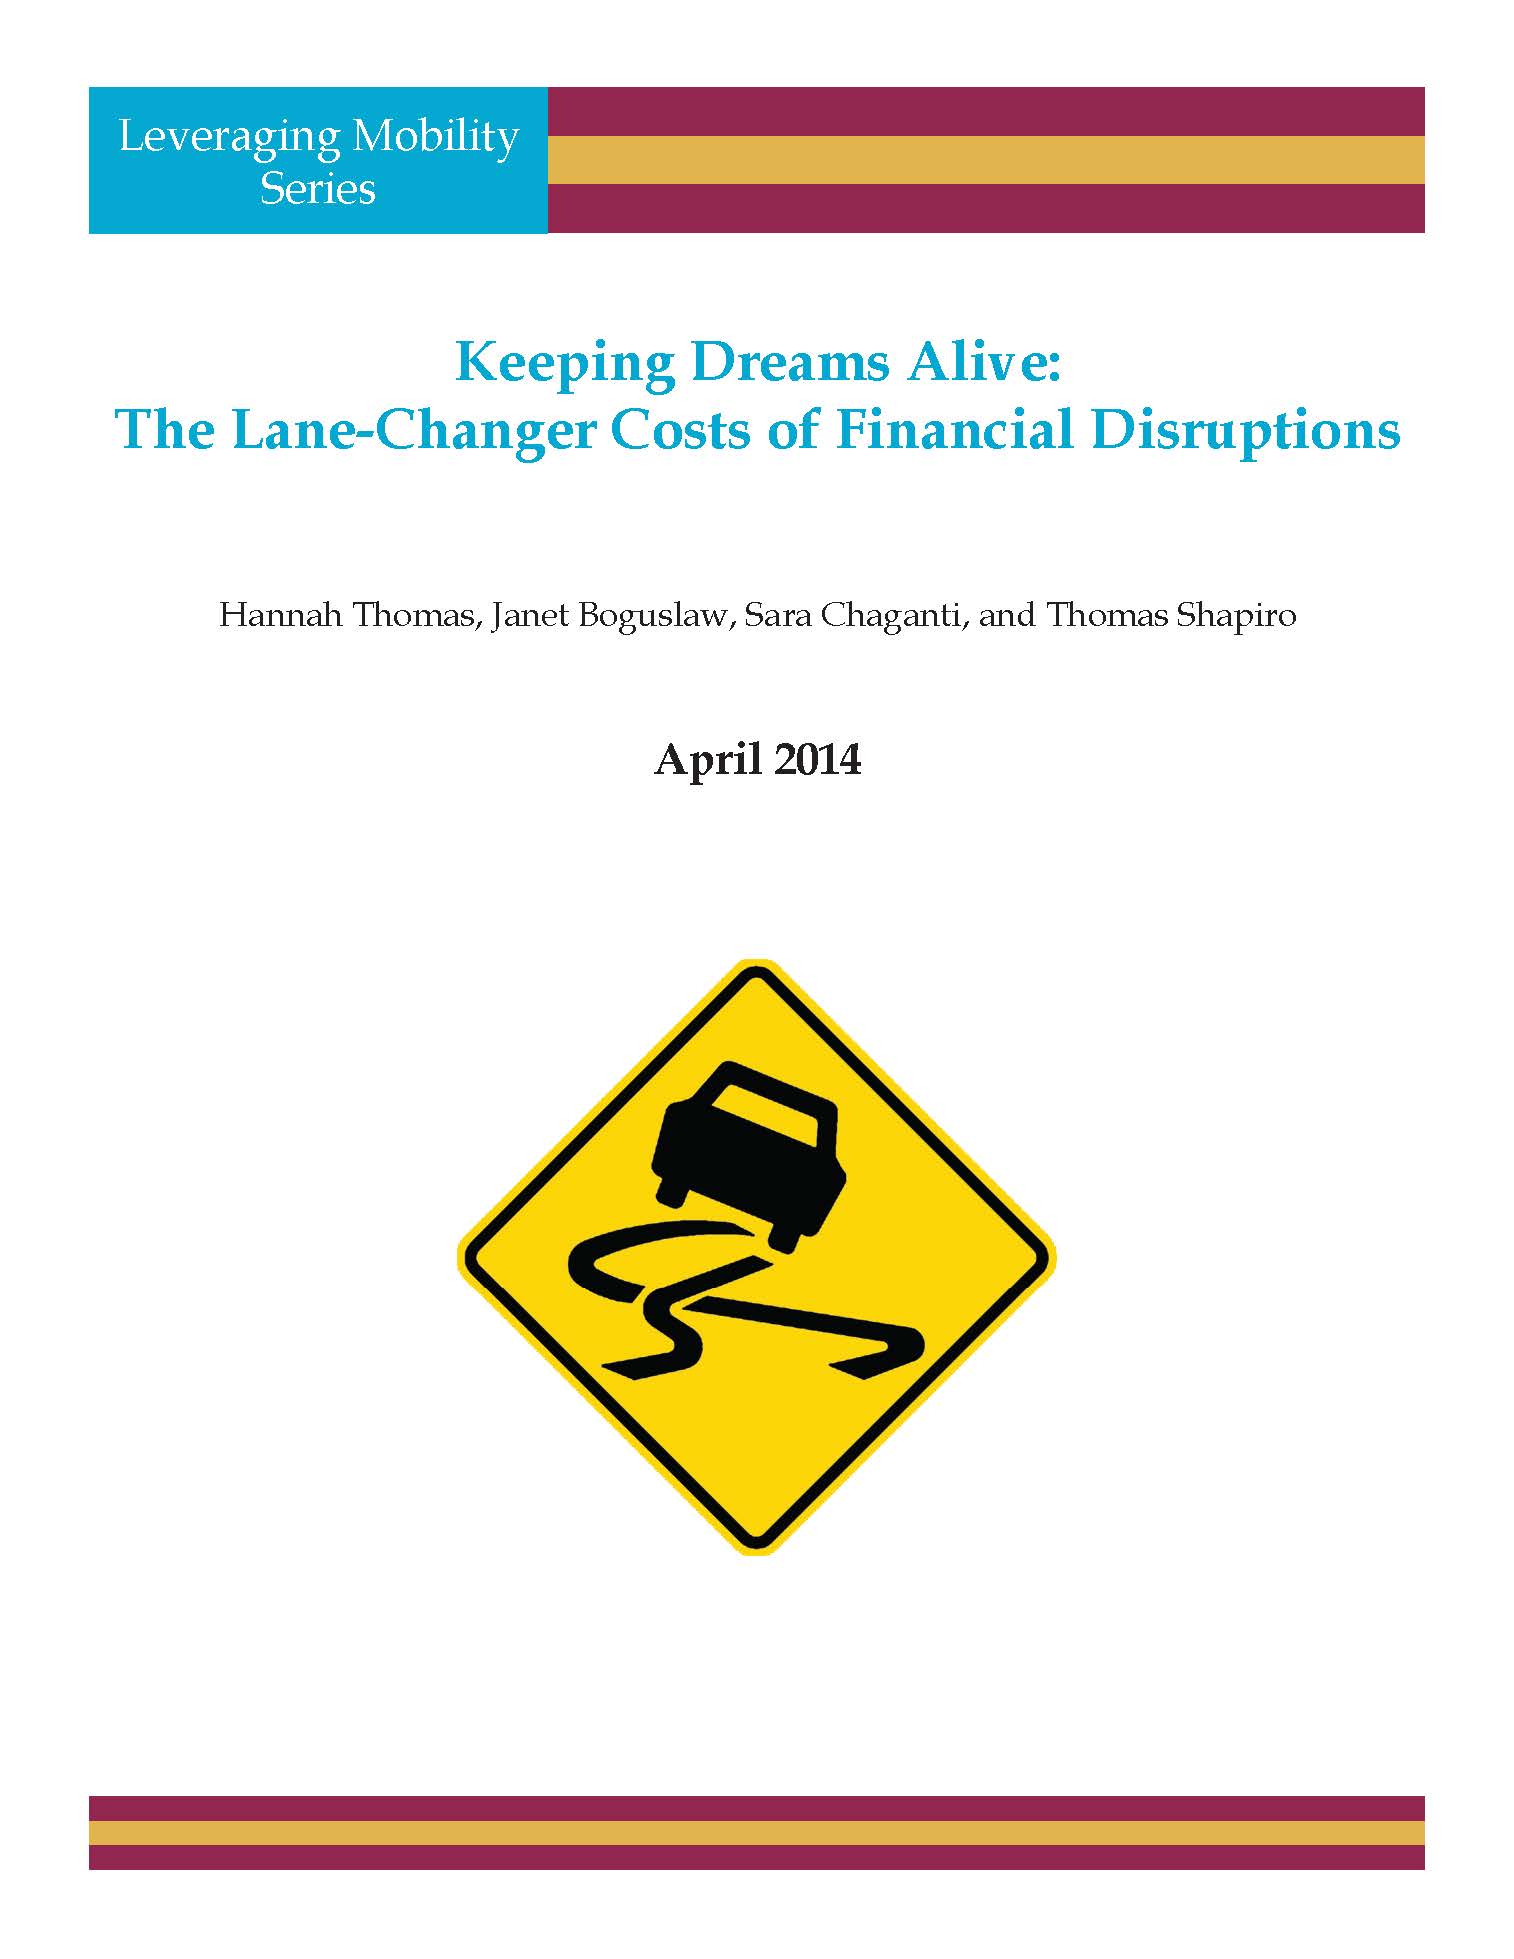 Cover of keeping dreams alive report